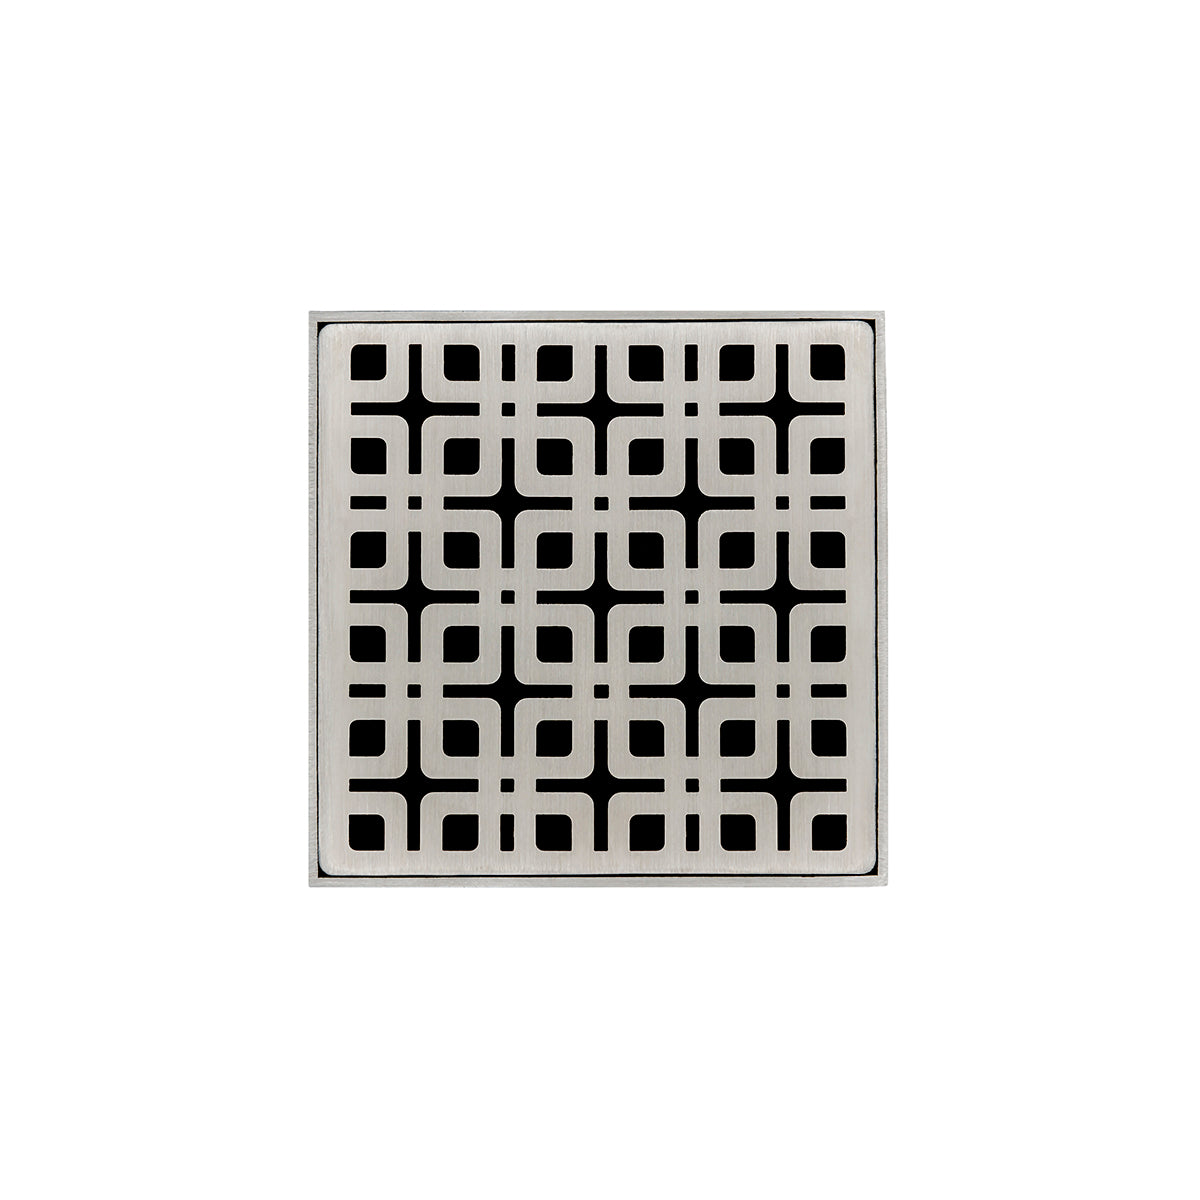 Infinity Drain 4" x 4" KDB 4 Premium Center Drain Kit with Link Pattern Decorative Plate with ABS Bonded Flange Drain Body, 2", 3" and 4" Outlet